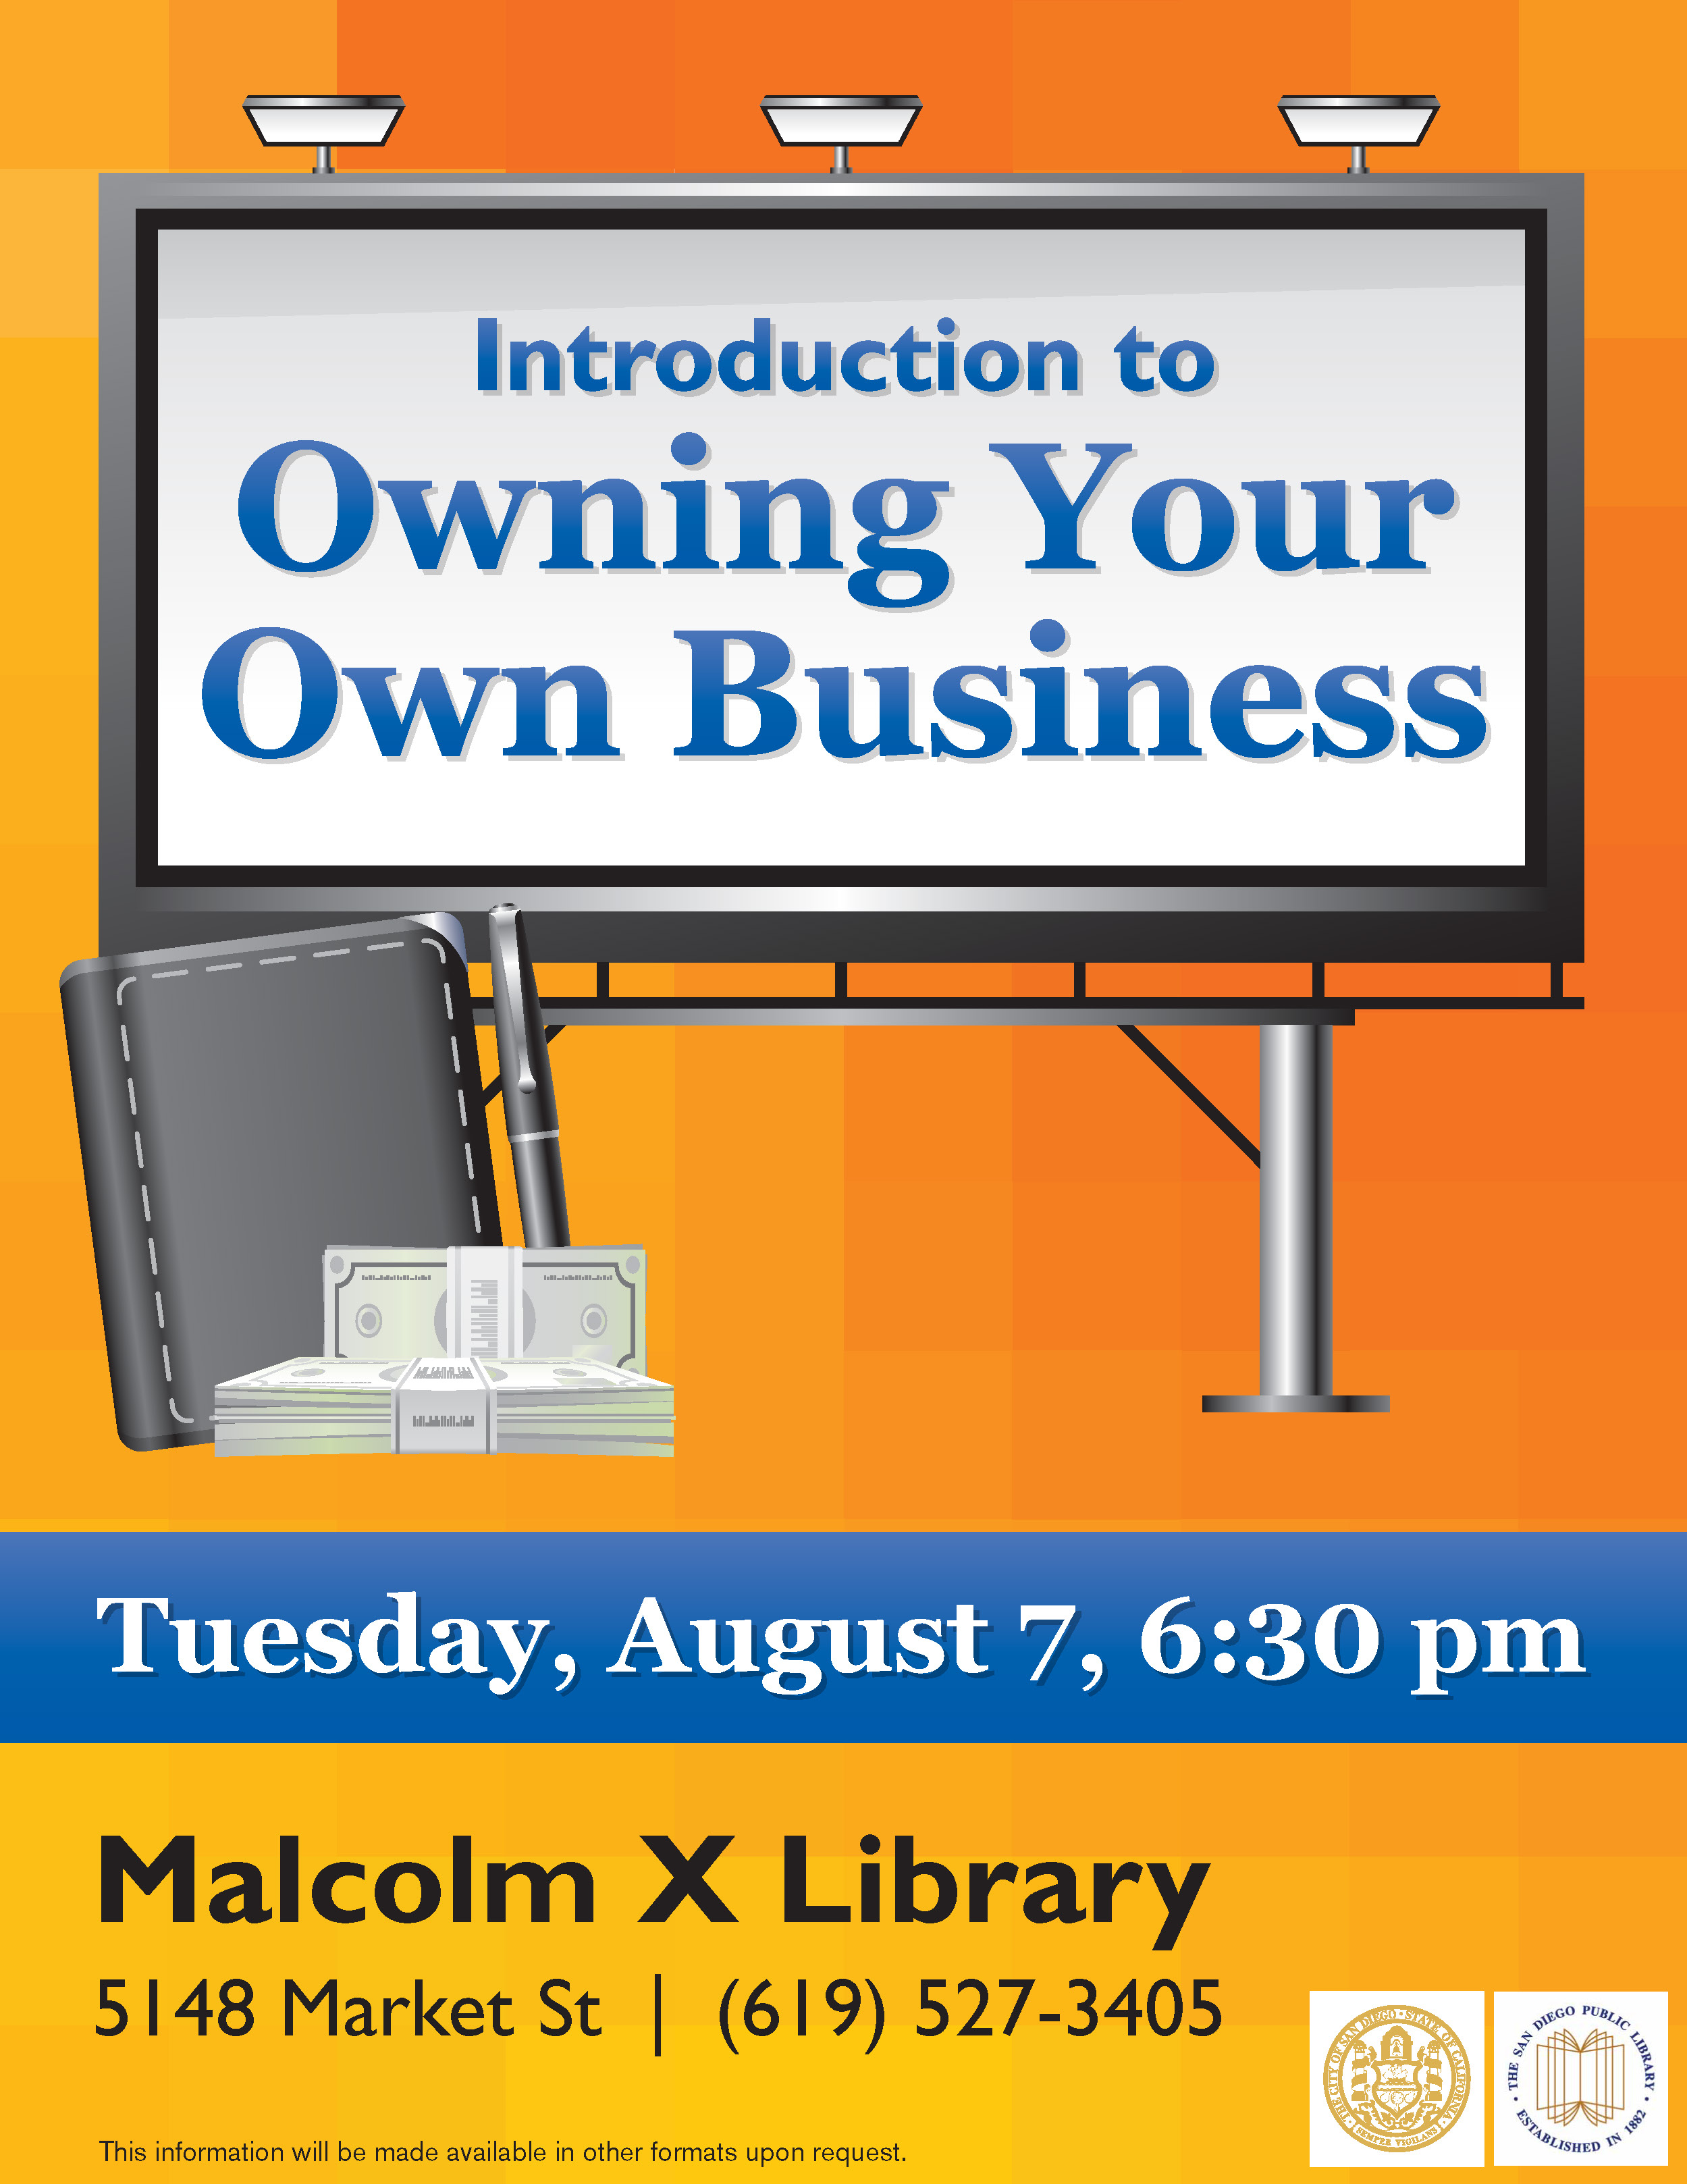 Introduction to Owning Your Own Business. Tuesday, August 7, 6:30 pm